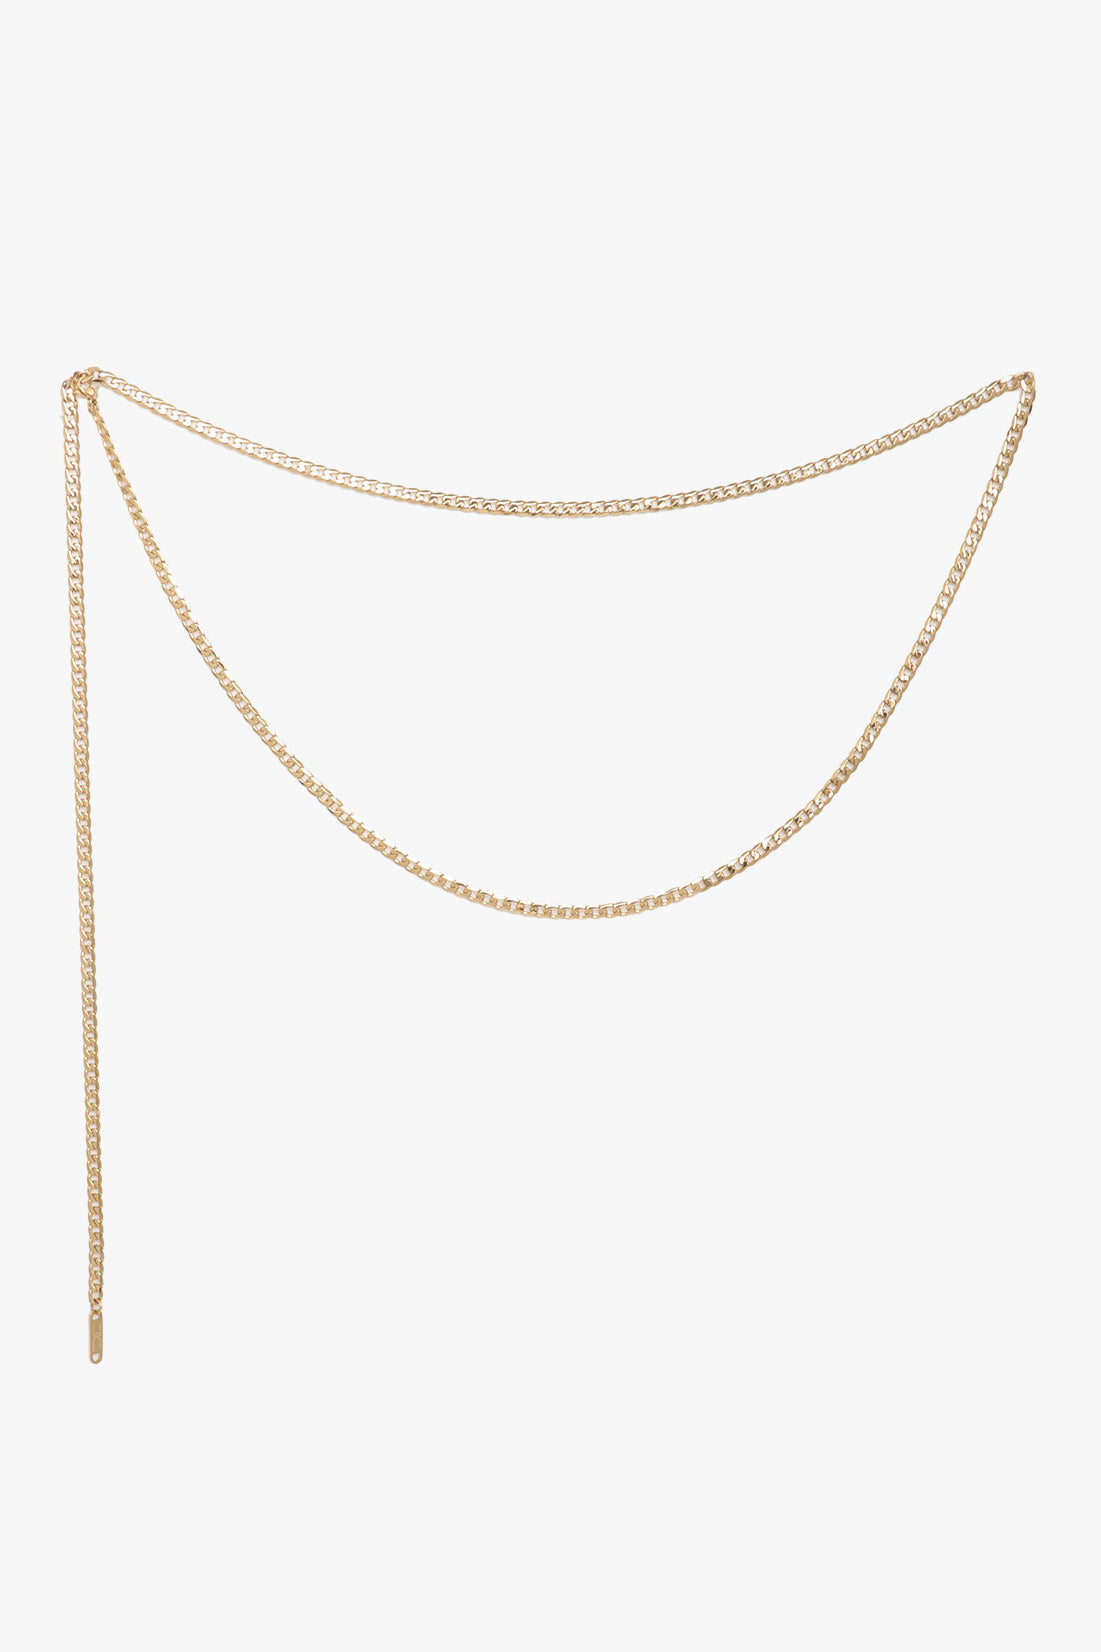 Marrin Costello Jewelry Callie Belt 40 inch small cuban link chain with lobster clasp closure.Waterproof, sustainable, hypoallergenic. 14k gold plated stainless steel.